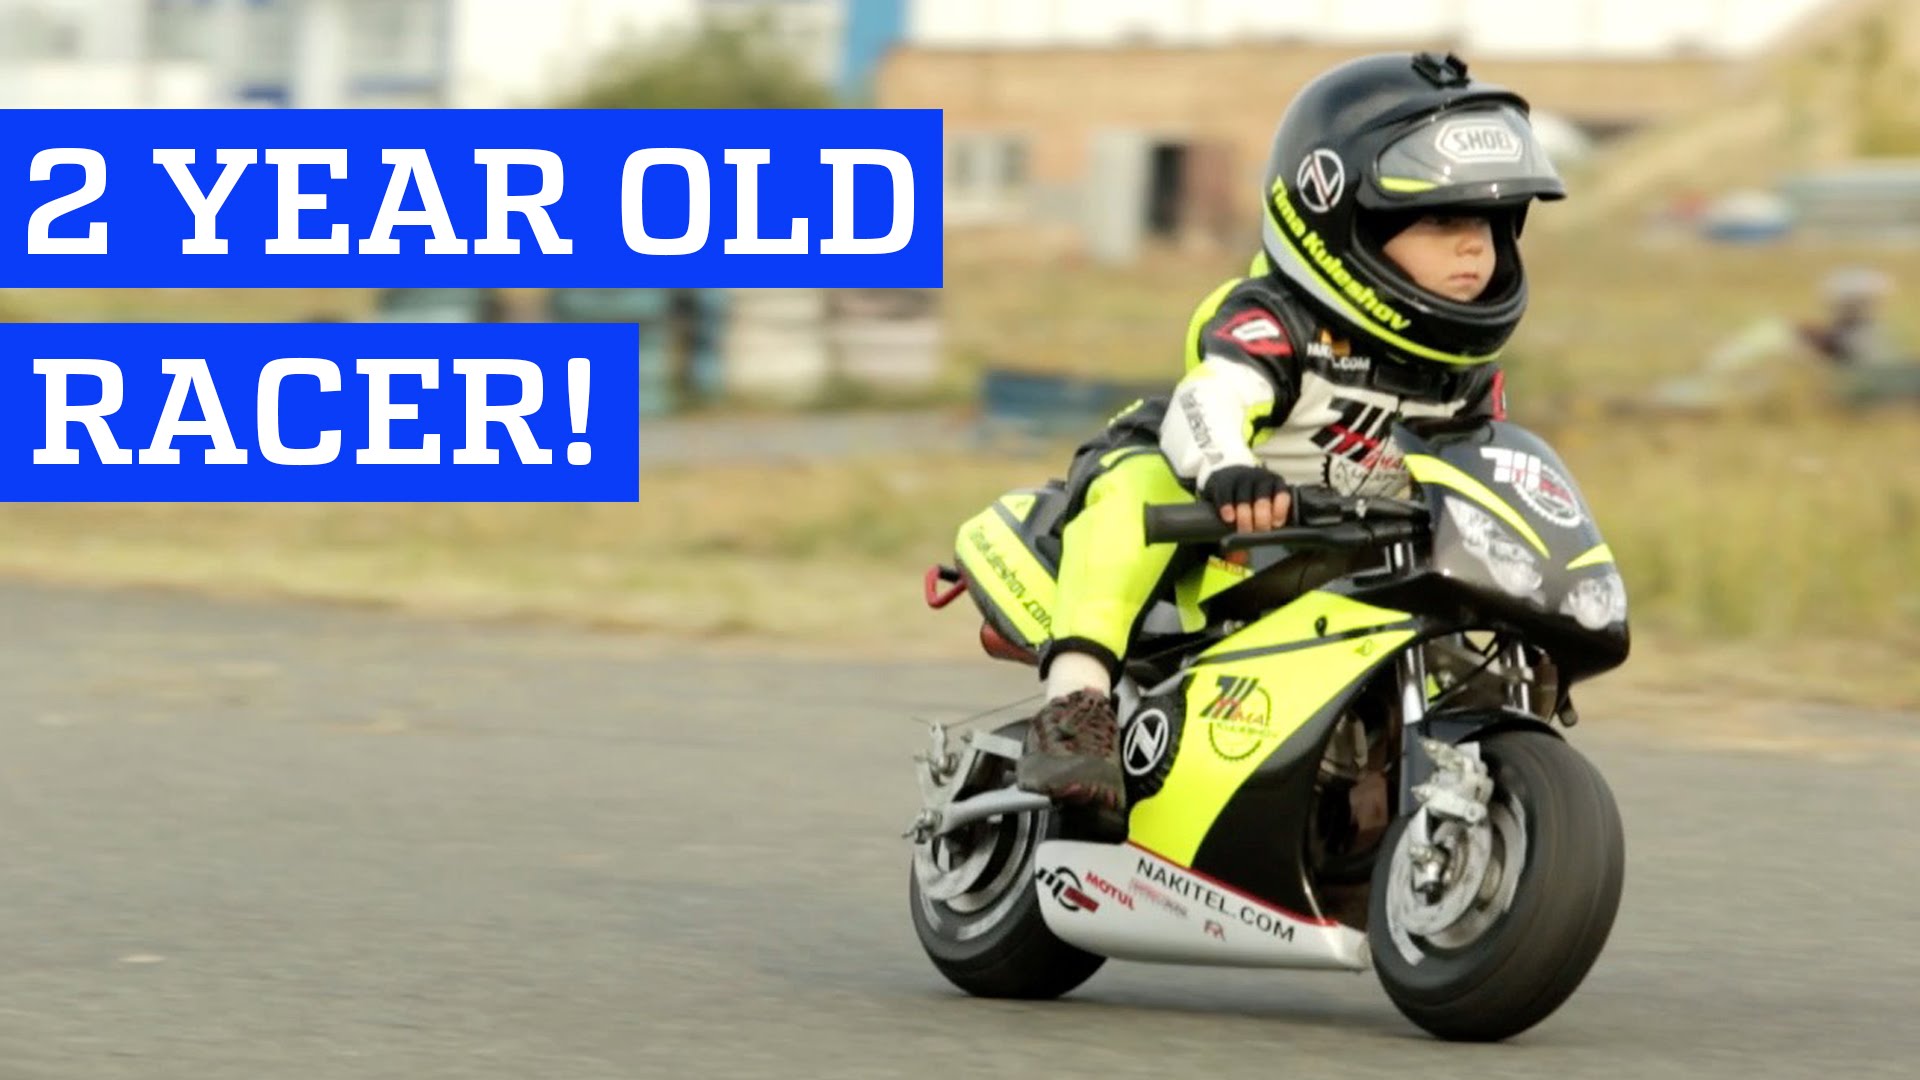 Two year old motorcycle racer! | People are Awesome - YouTube